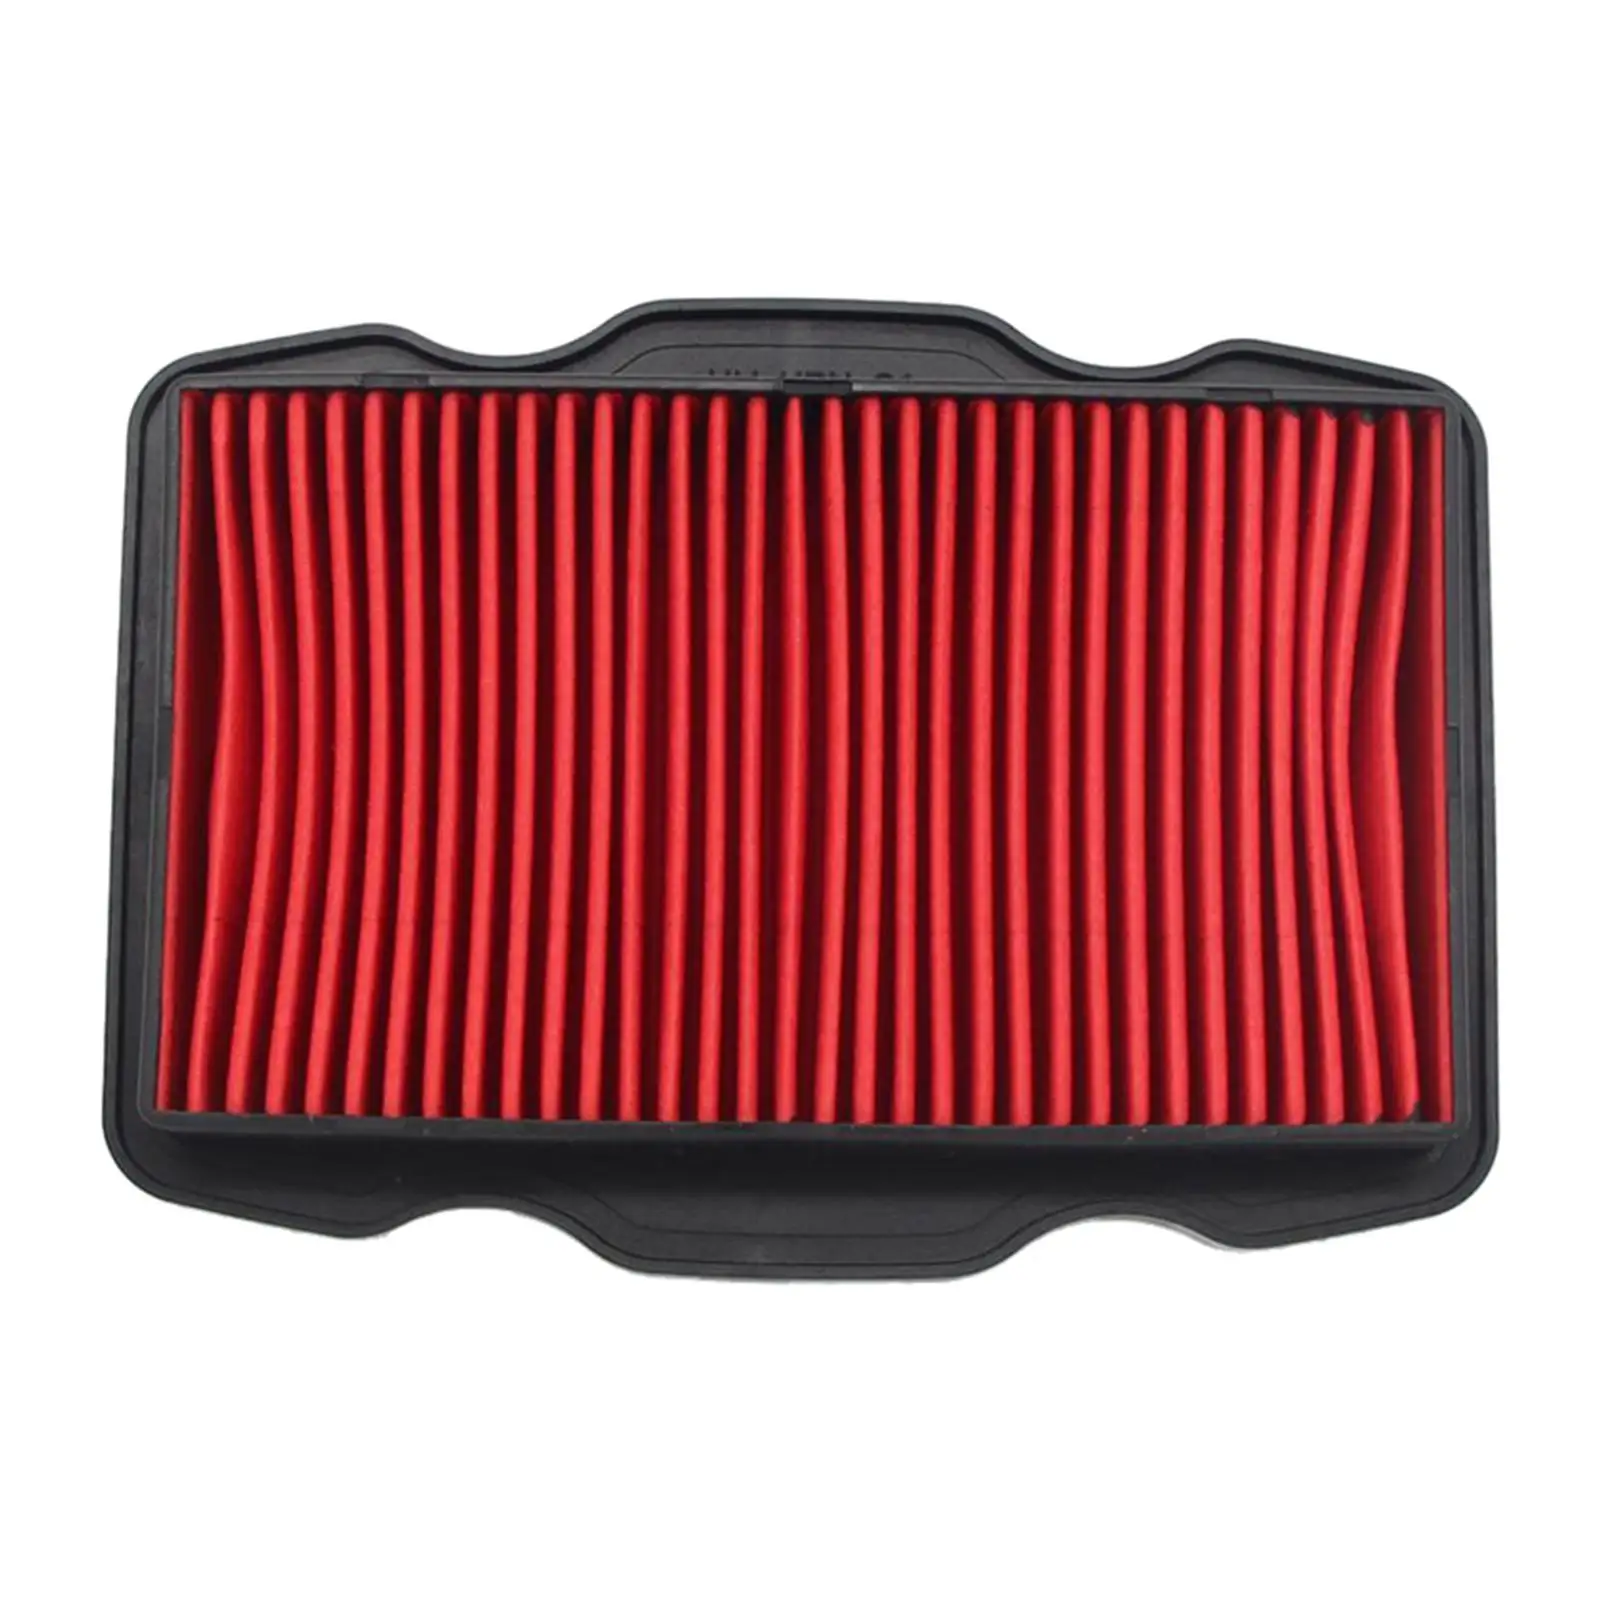 Motorcycle Air Filter Sponge Durable Fits for  17211-KPN-A70 5F GLR125 9